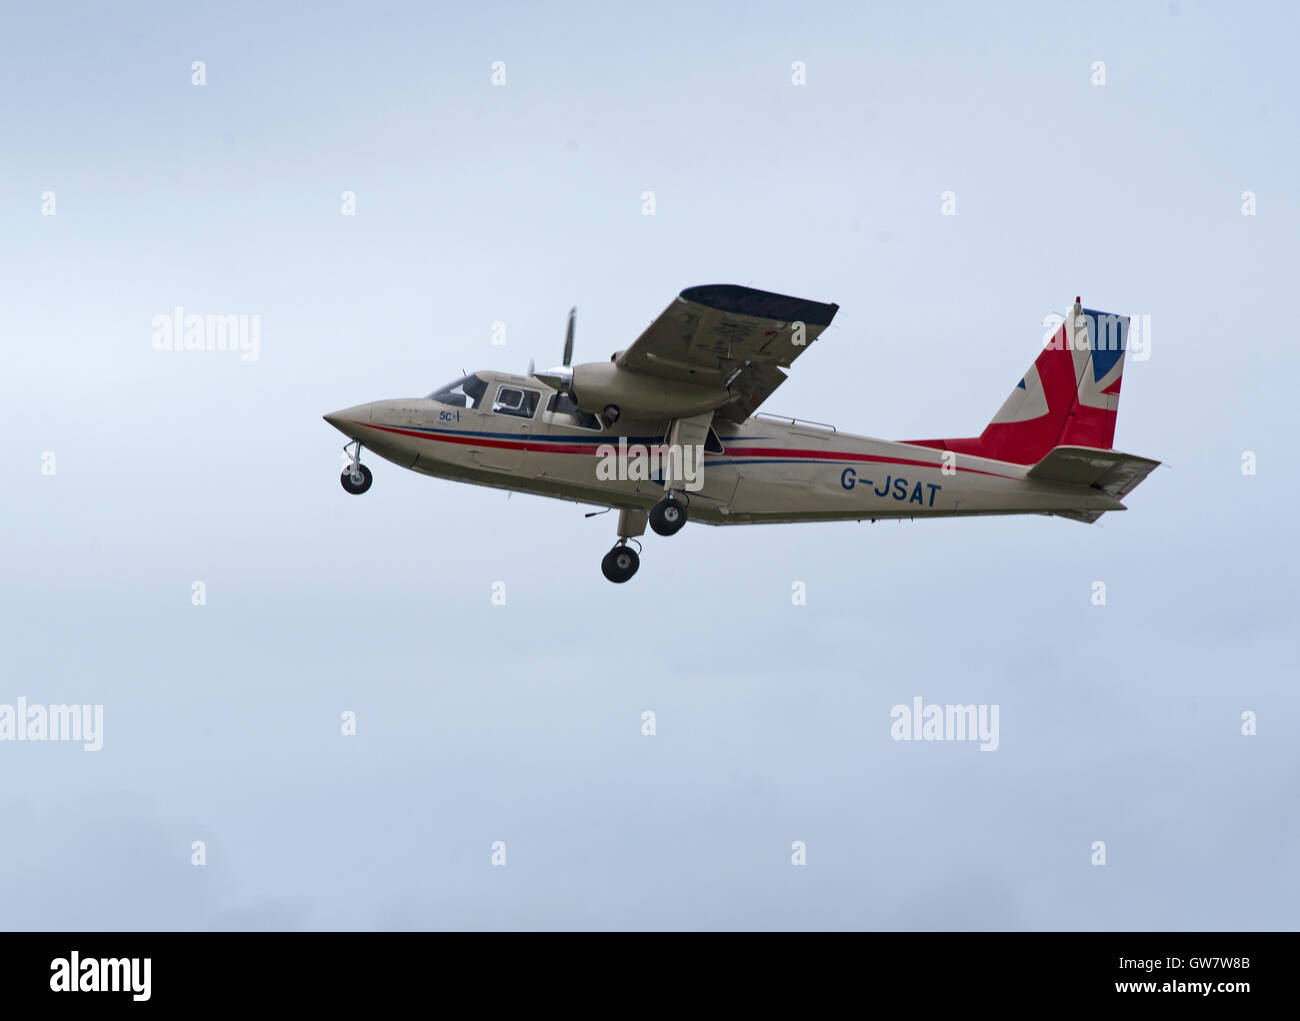 Commuter airliner and light utility aircraft. In service since 1981. Turboprop development of BN-2B Islander.  SCO 11,250. Stock Photo